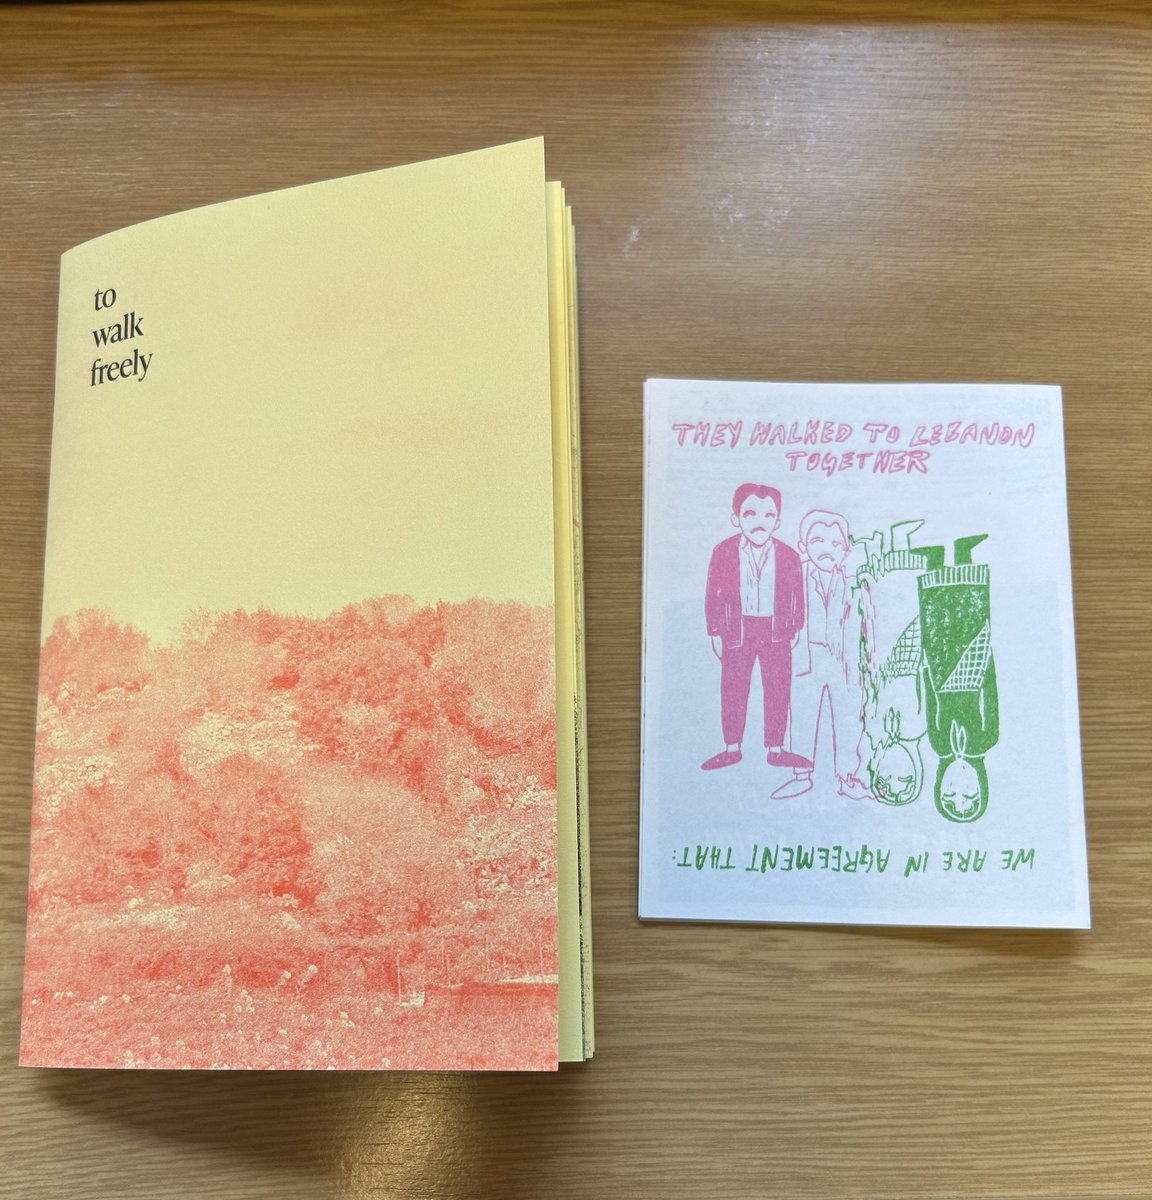 Two new zines for the #BLArabic collection: 📚 To Walk Freely by Aya Krisht on the Palestine-Lebanon border 📚 We Are in Agreement that / They Walked to Lebanon Together by Leila Abdelrazaq about the her grandparents’ escape to Lebanon as Palestinian refugees during the Nakba